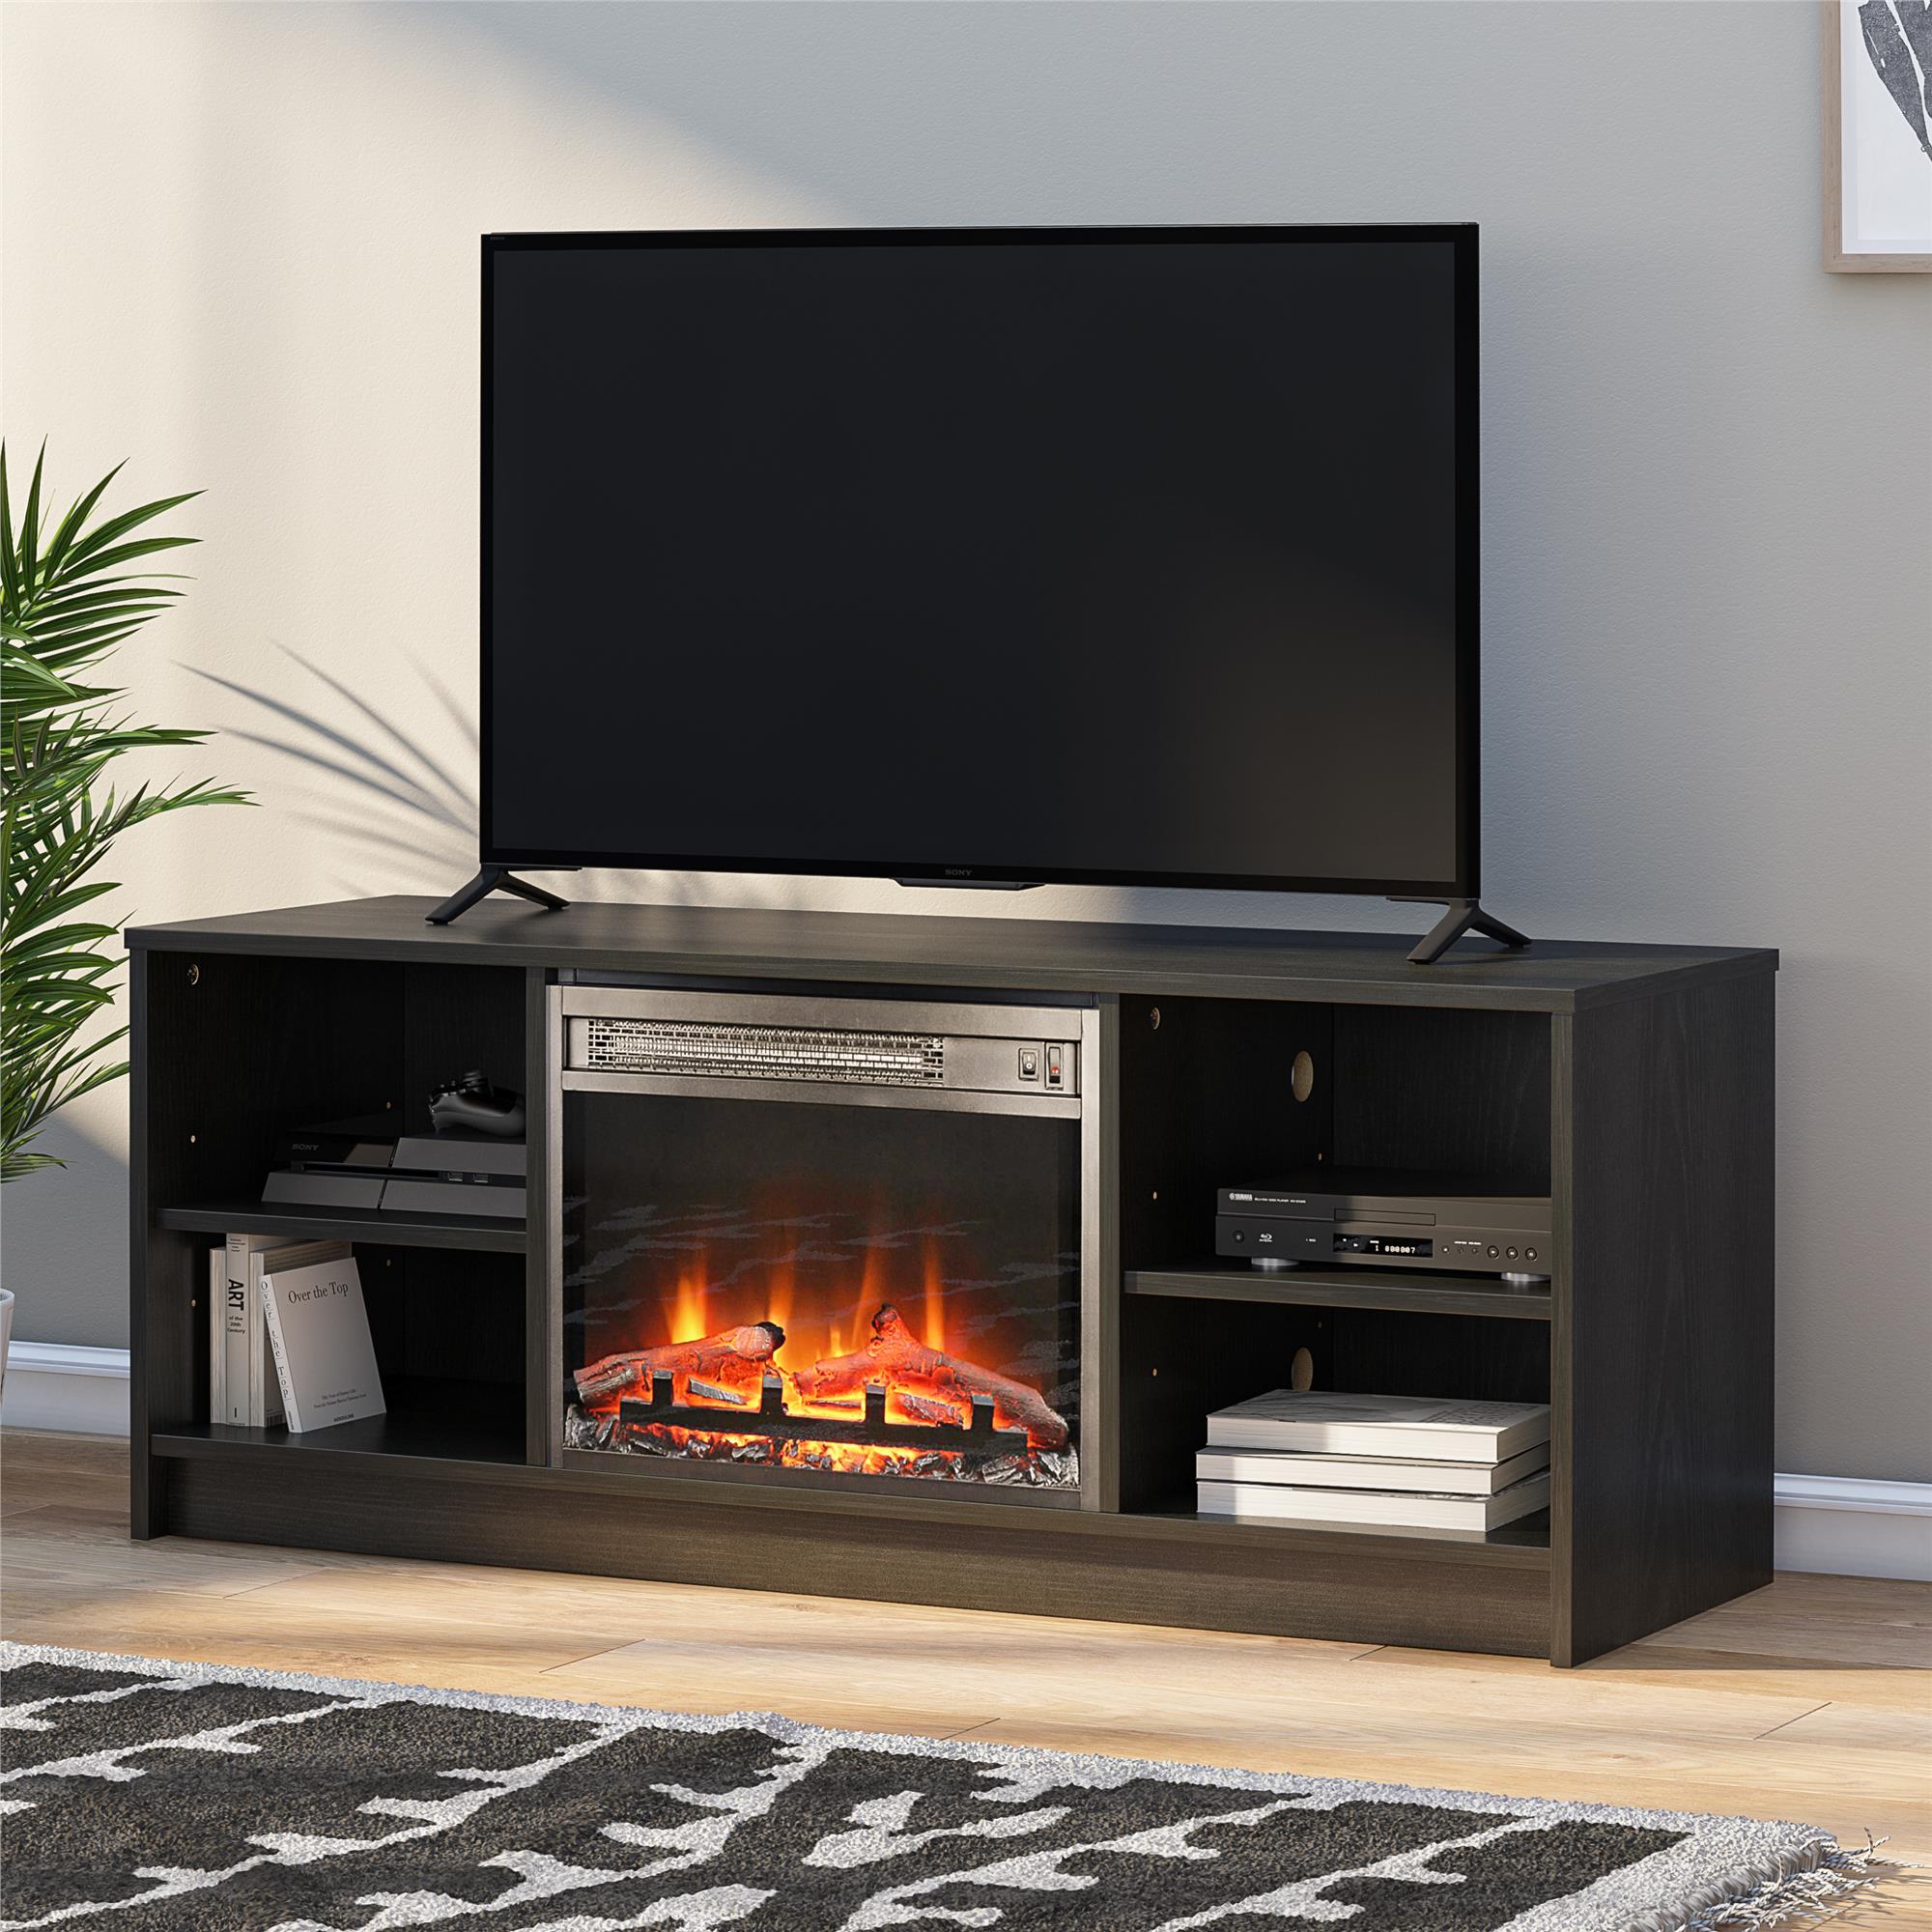 Mainstays Fireplace TV Stand, for TVs up to 55", Black Oak - image 1 of 12